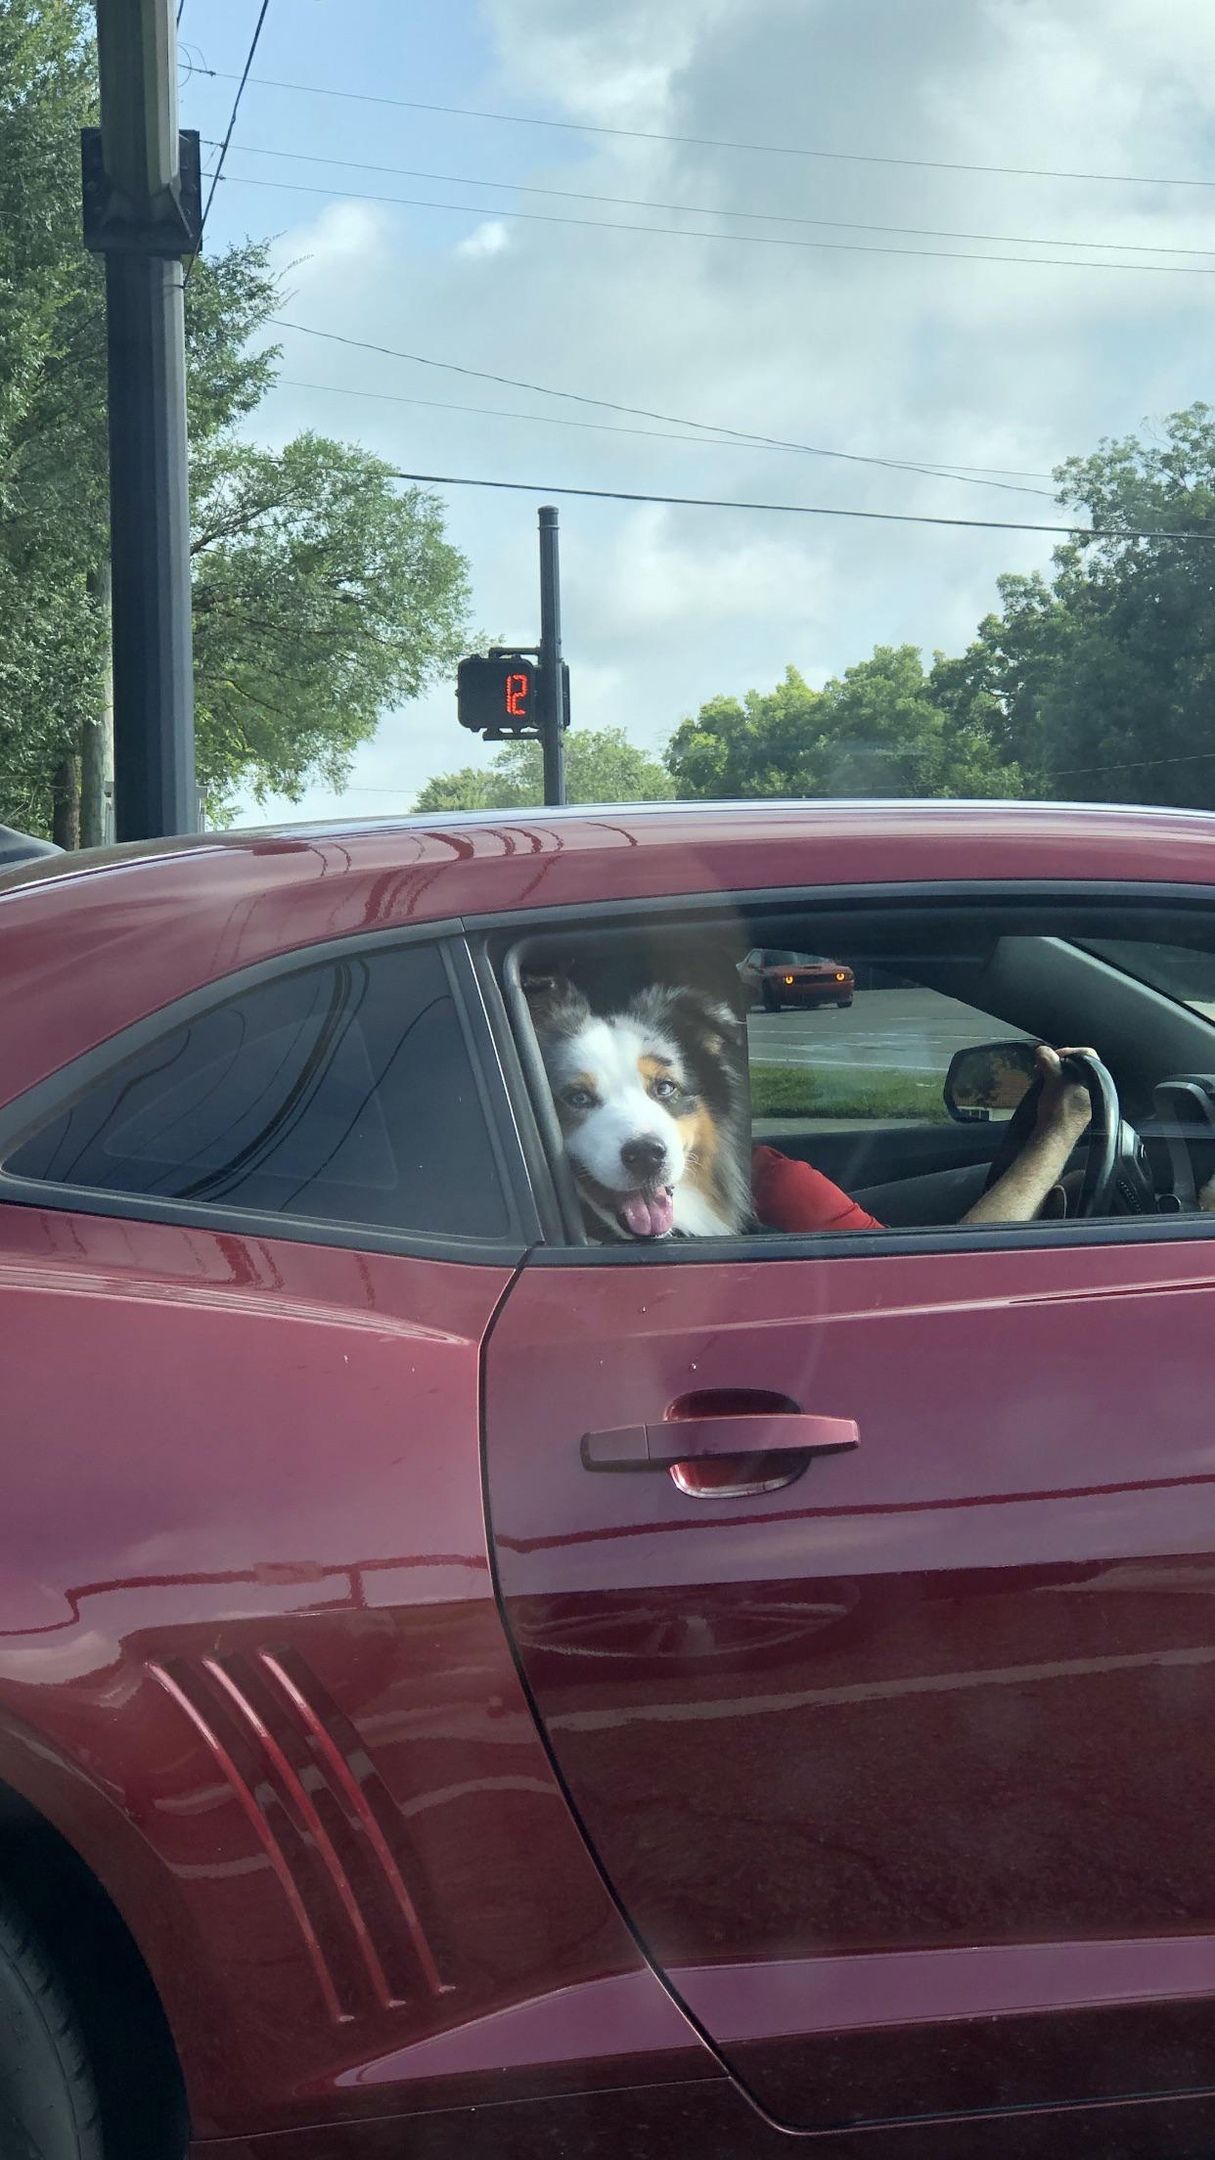 This cute guy checking me out at the light